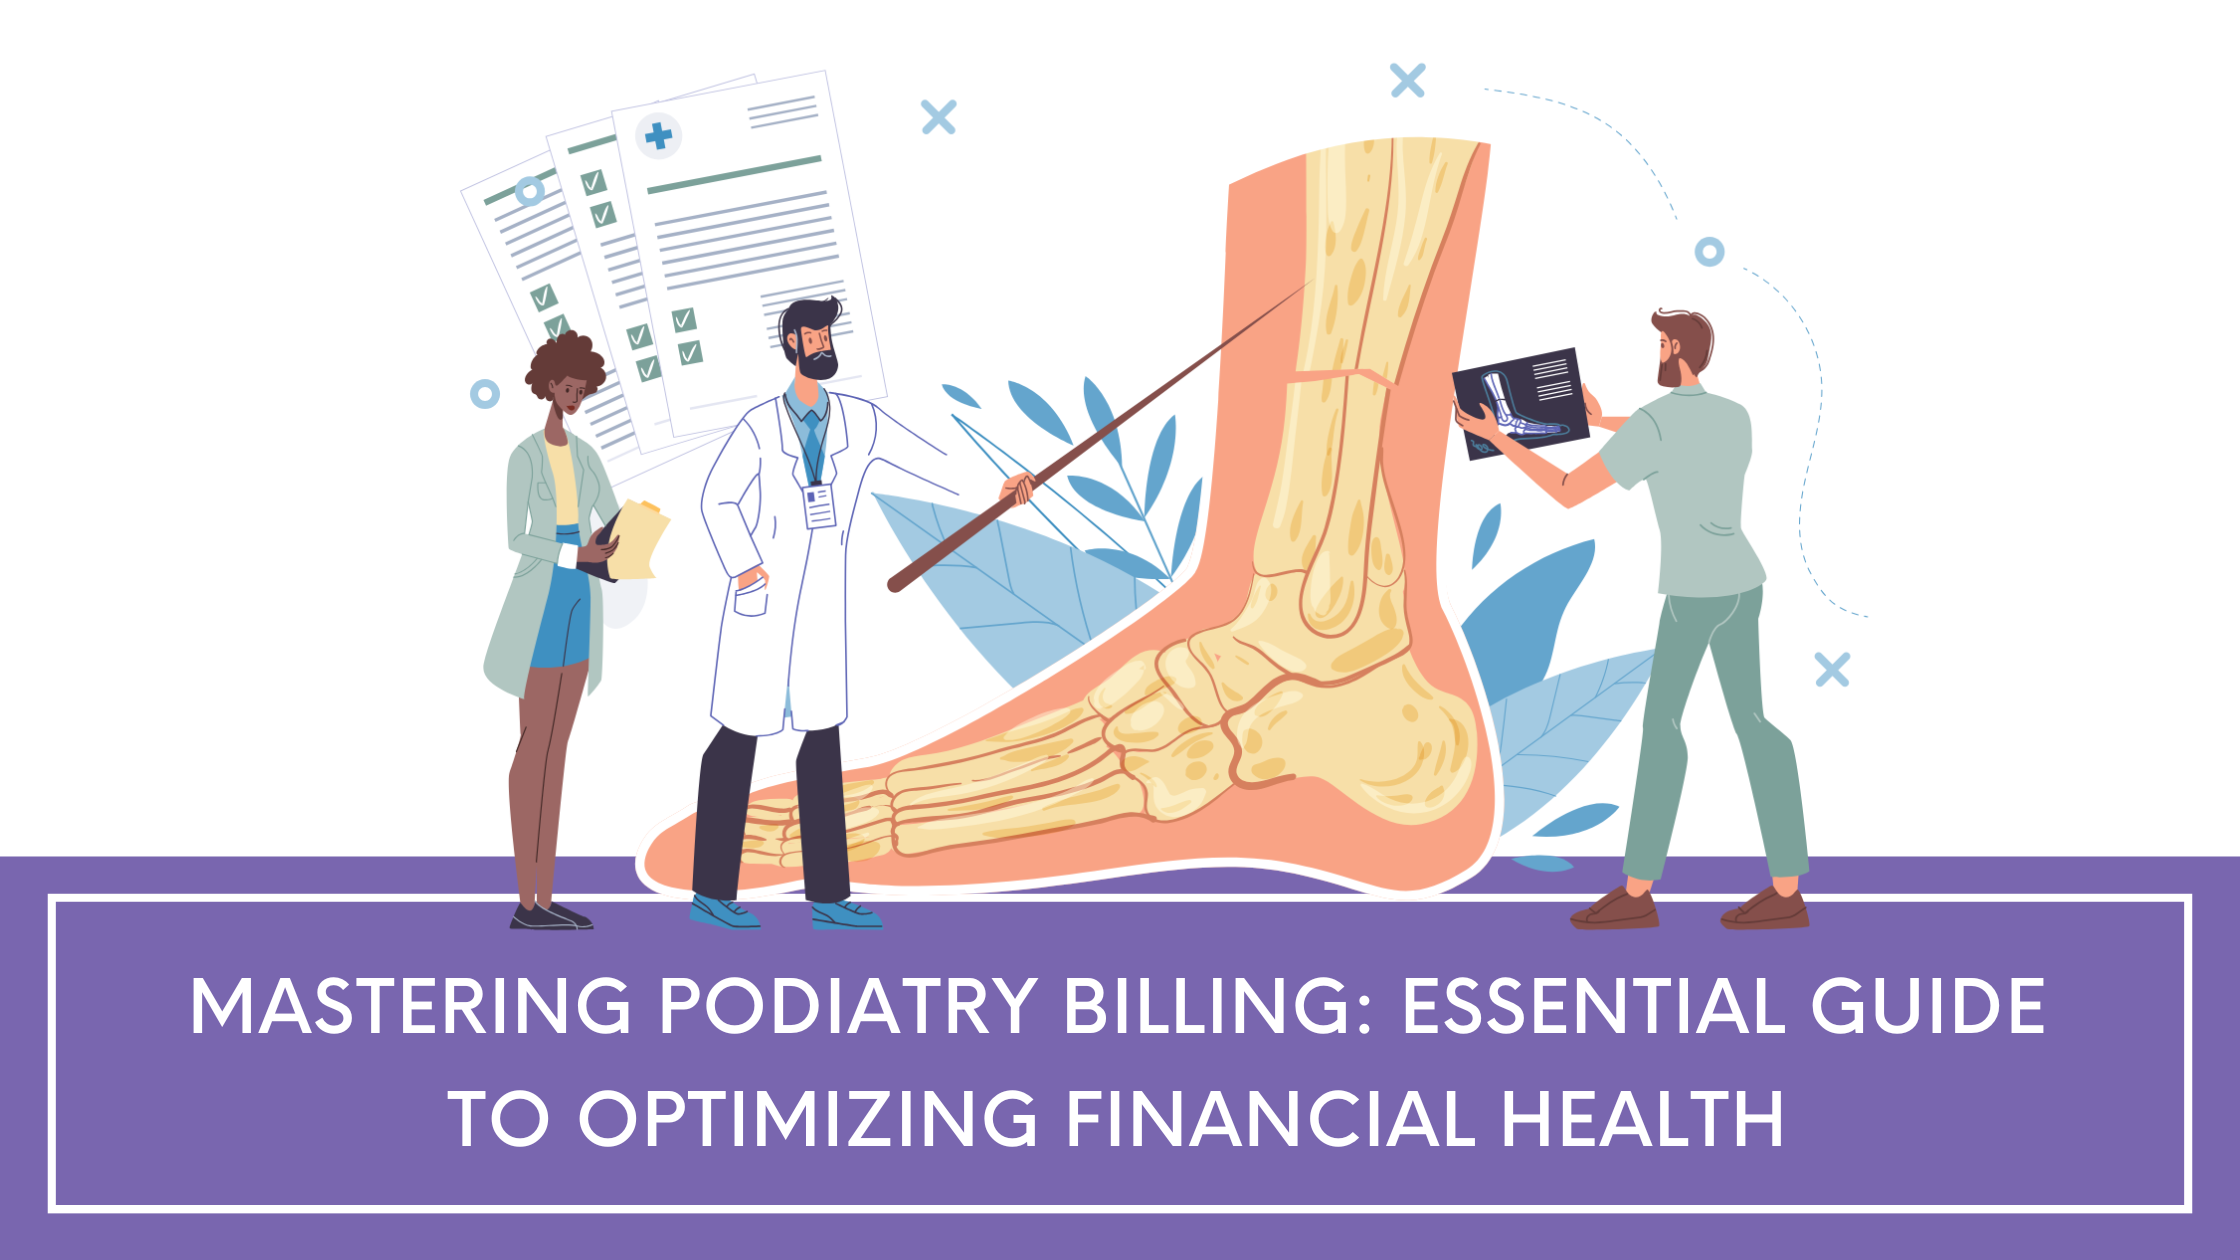 podiatry billing guide for financial health